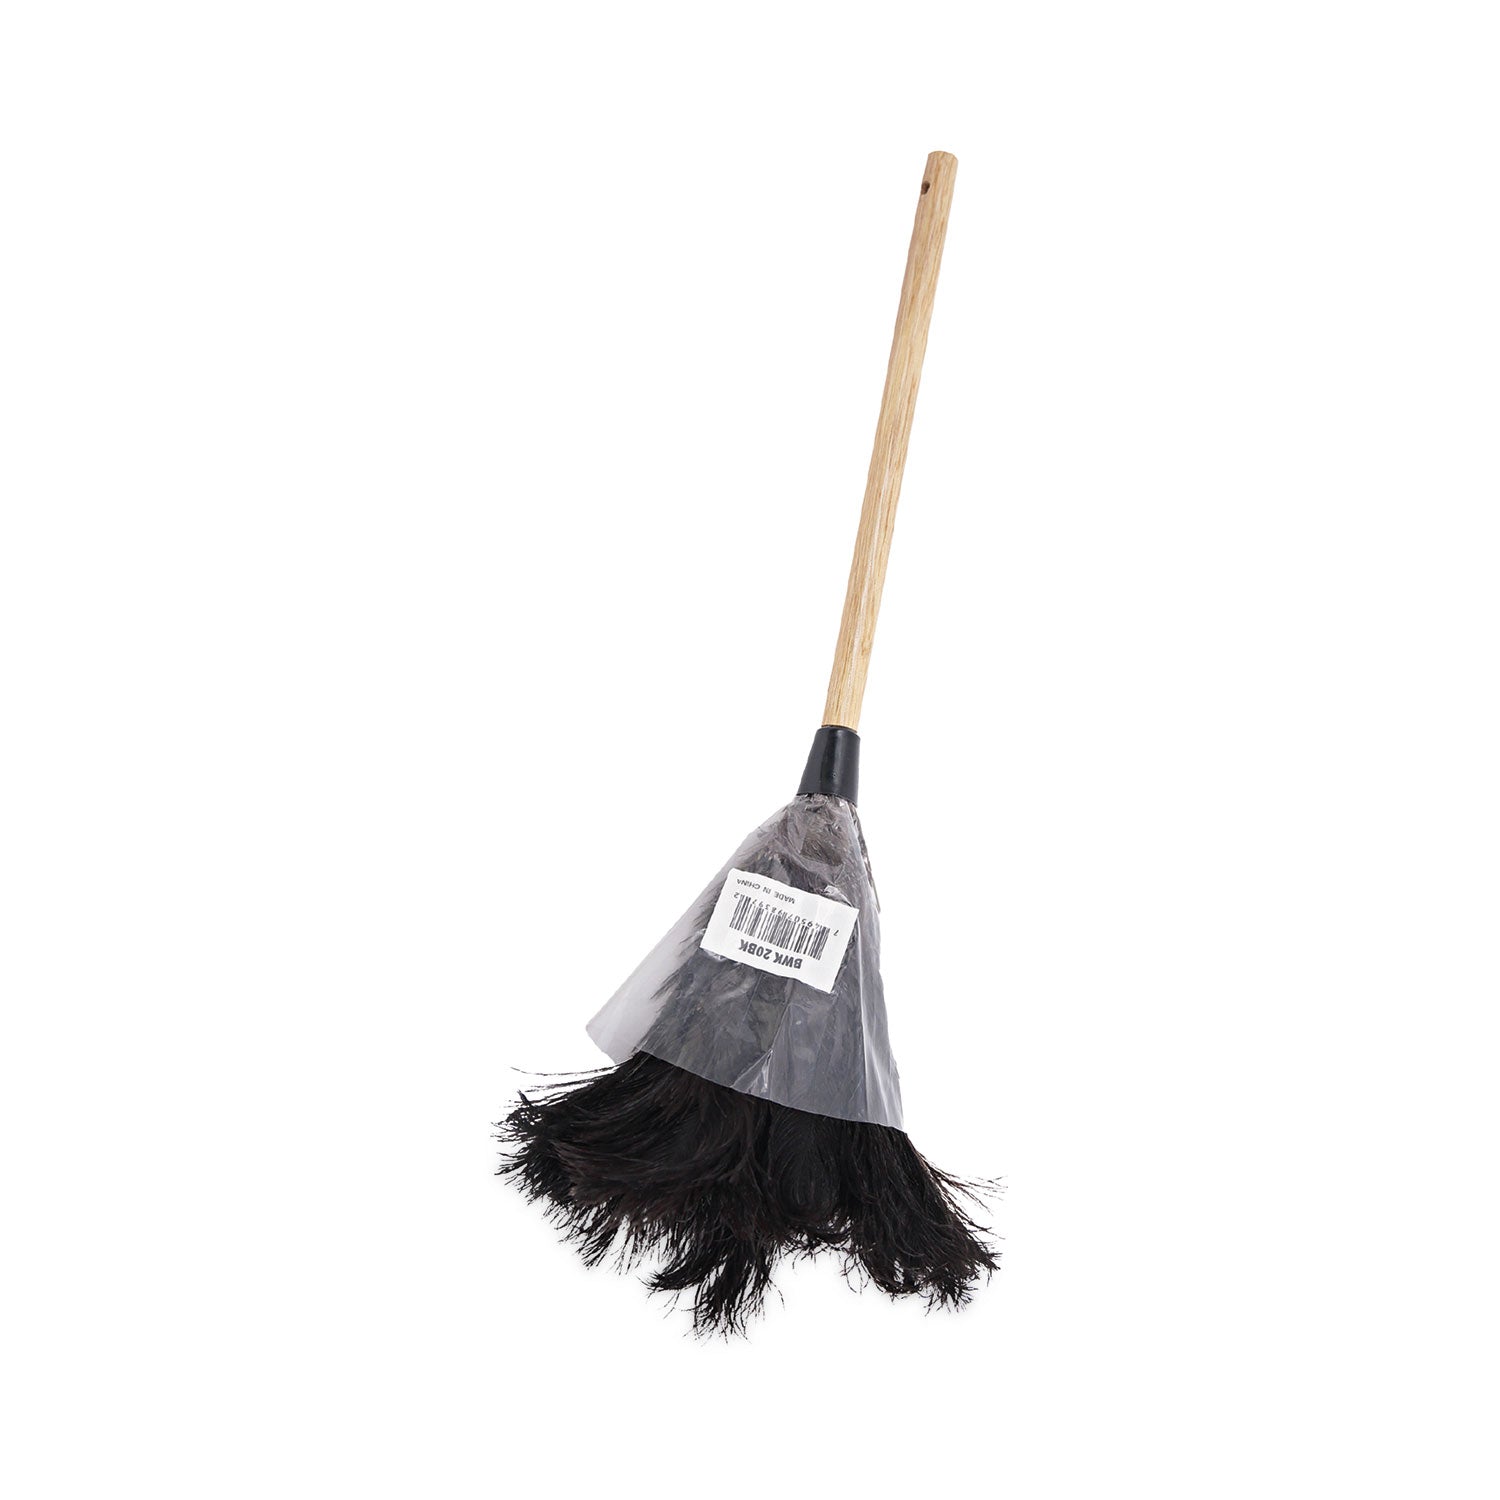 professional-ostrich-feather-duster-10-handle_bwk20bk - 7